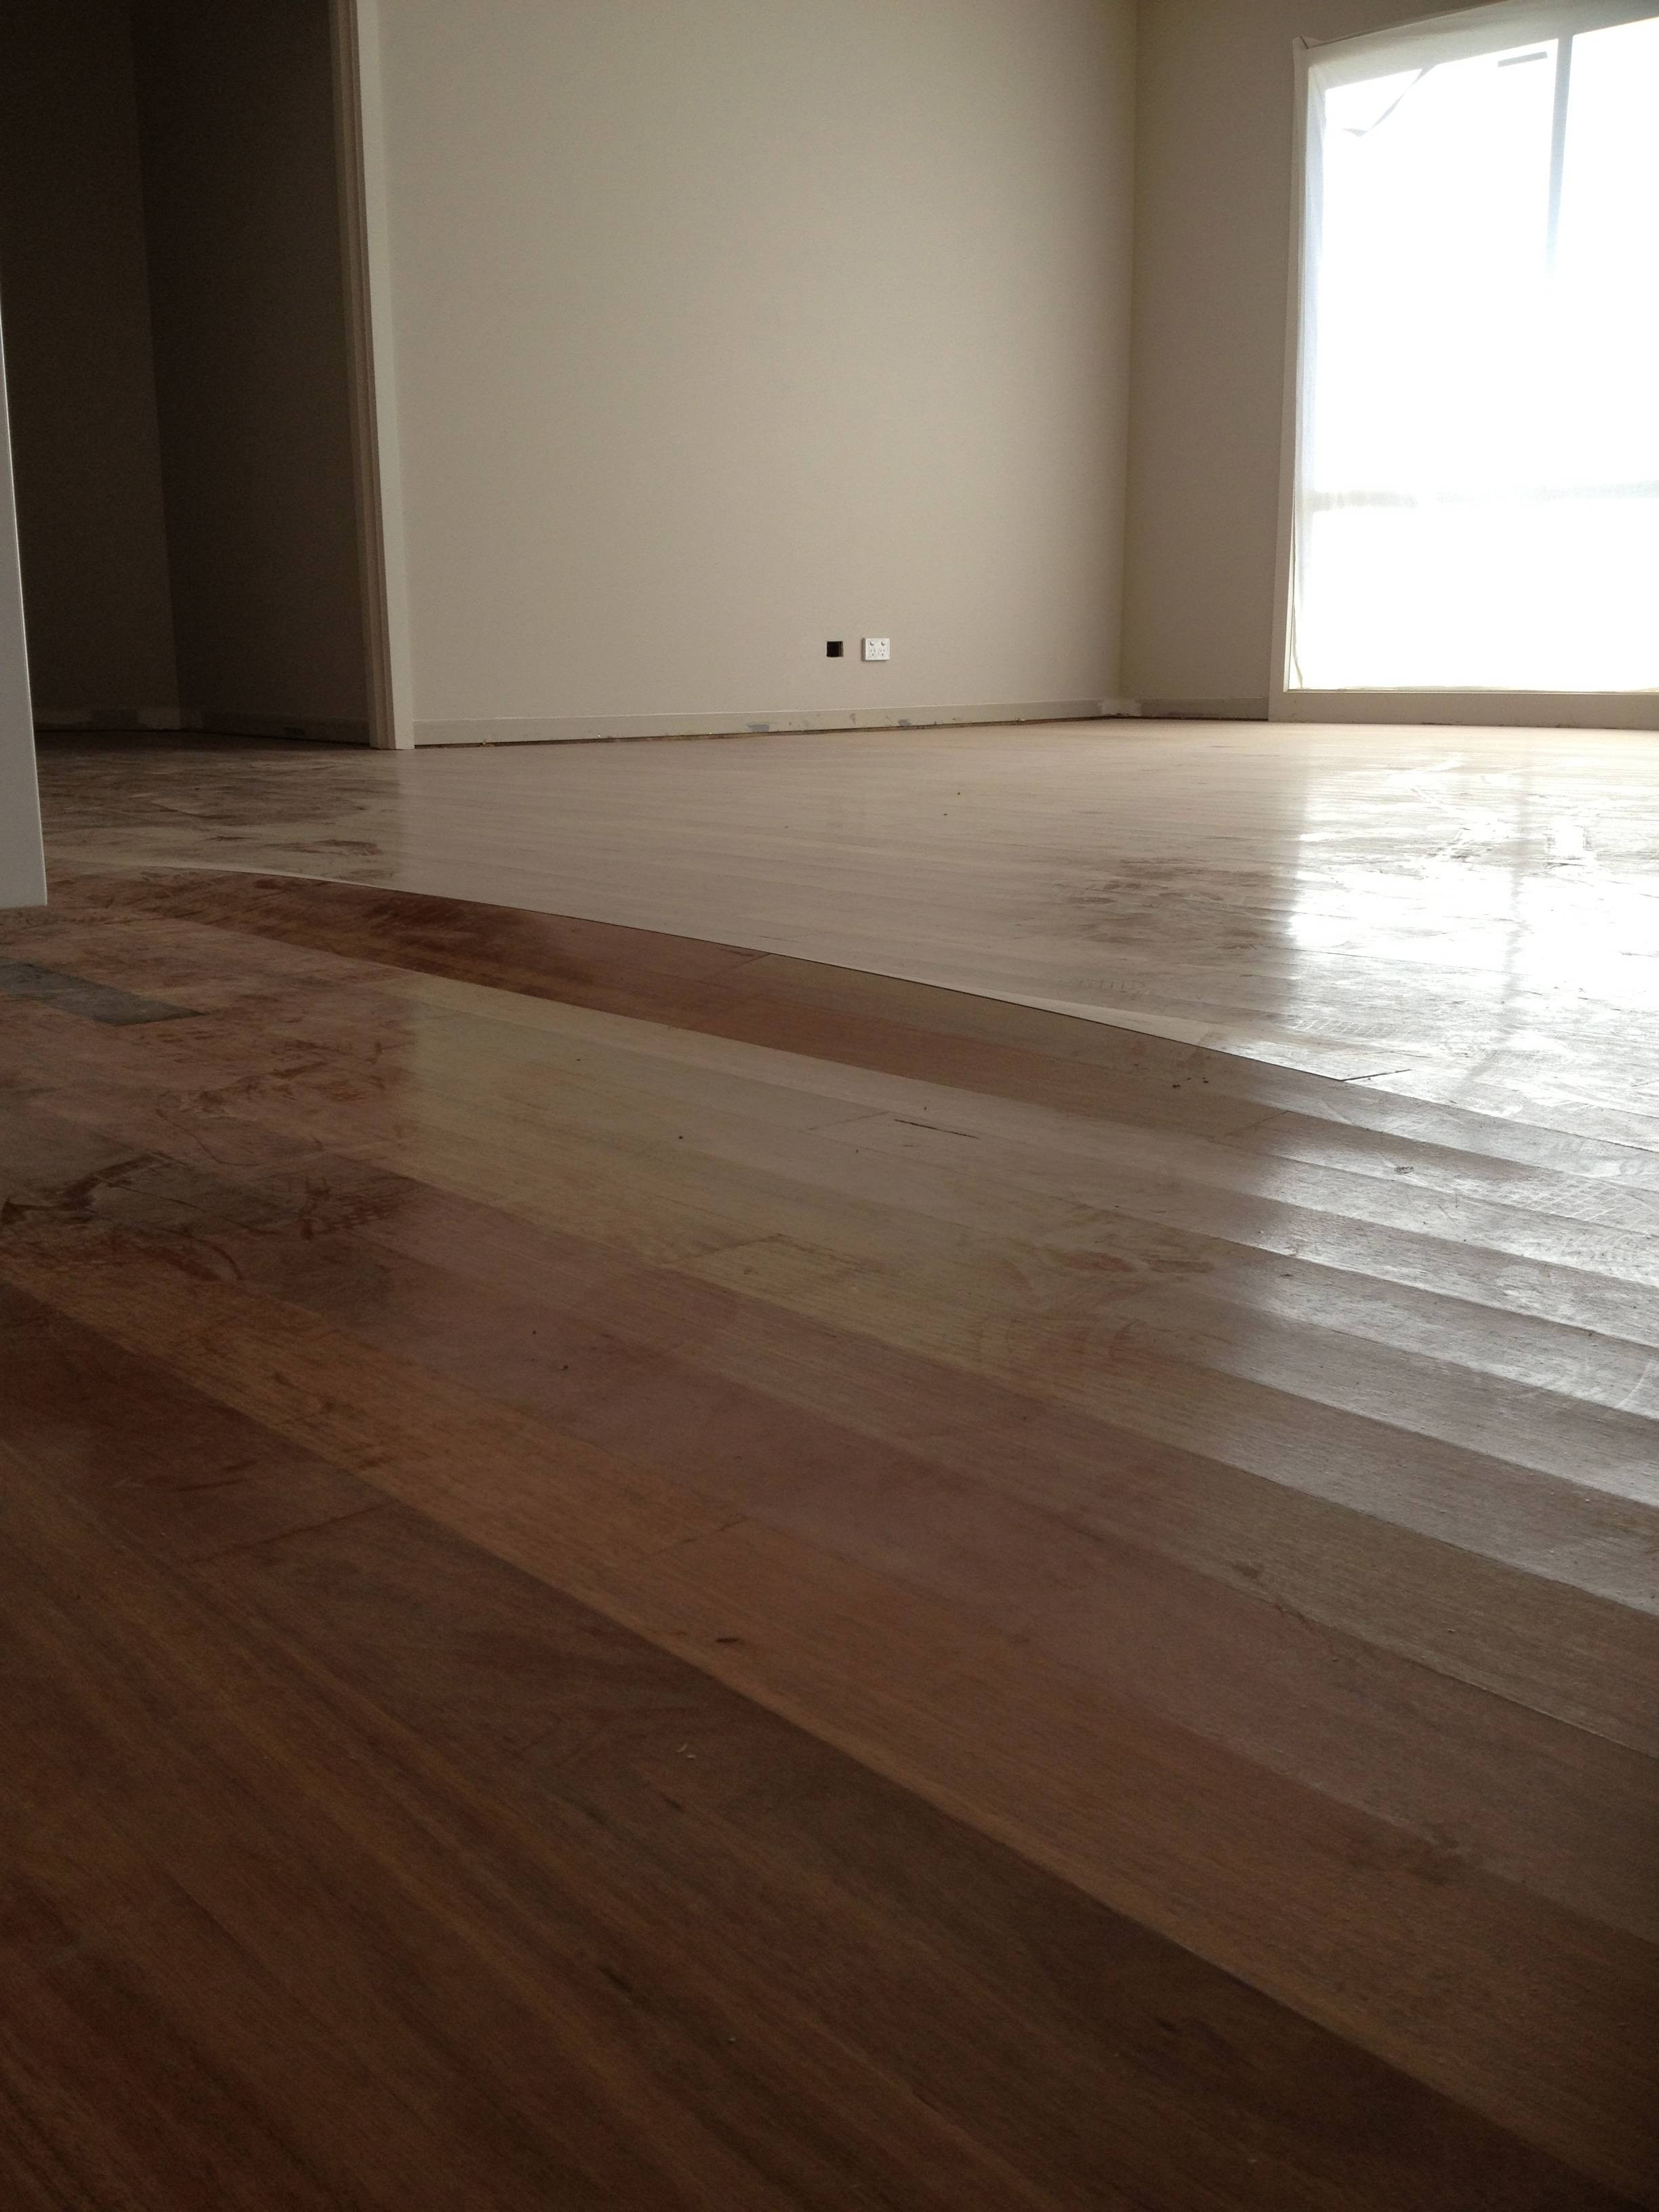 hardwood floor problems cupping of wood floor cupping coloring multi color wood floor new naturalny dub intended for wood floor cupping how to rid of moisture in hardwood flooring home improvement